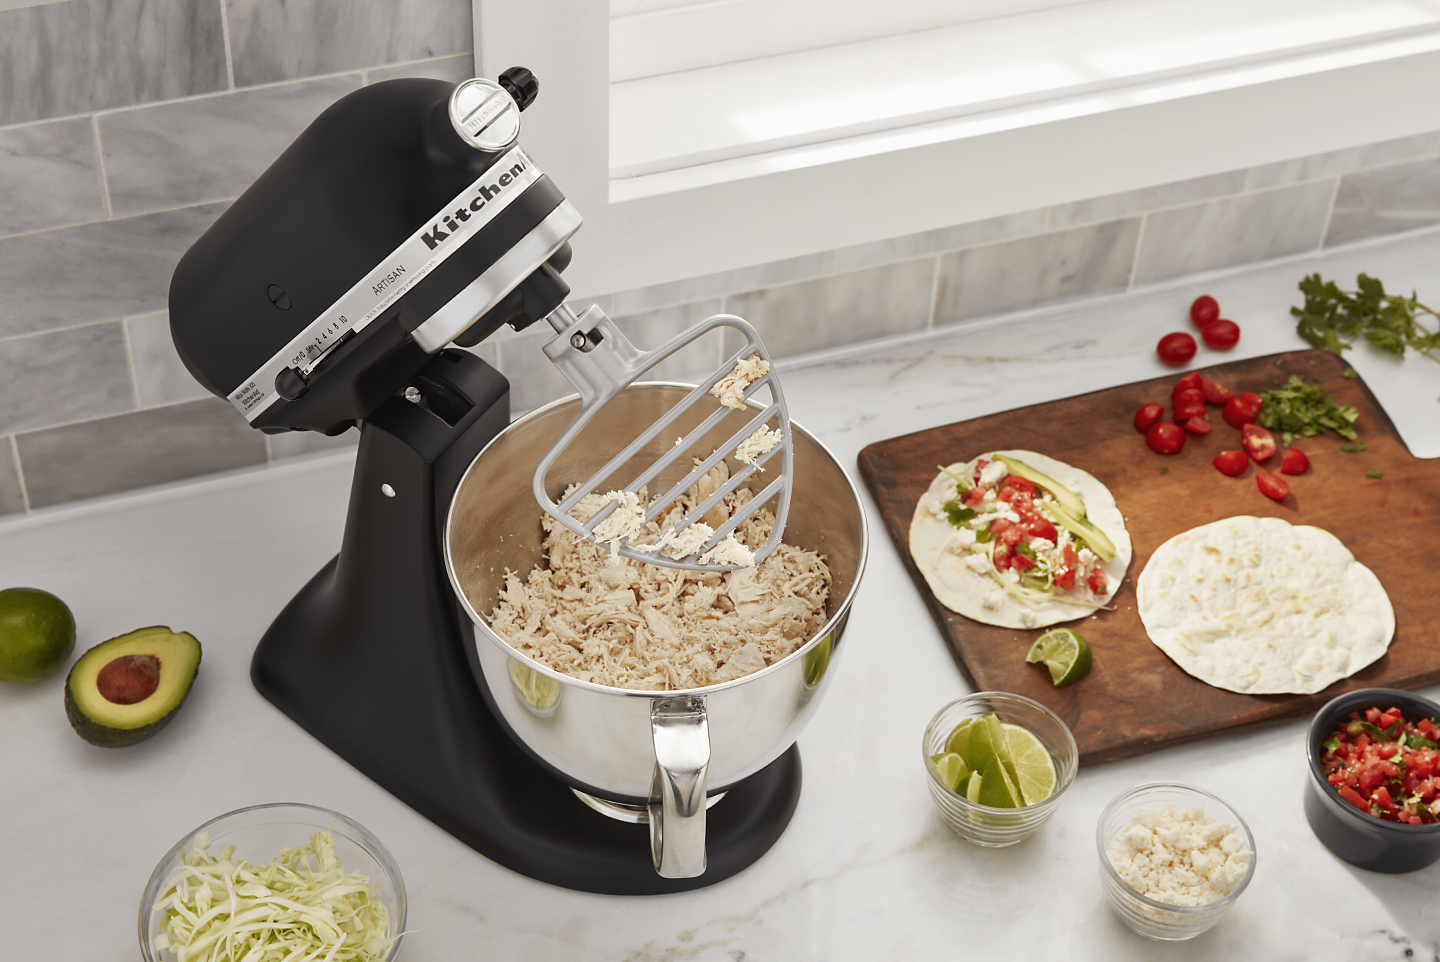 Stand Mixer Speed Control Guide and Reference